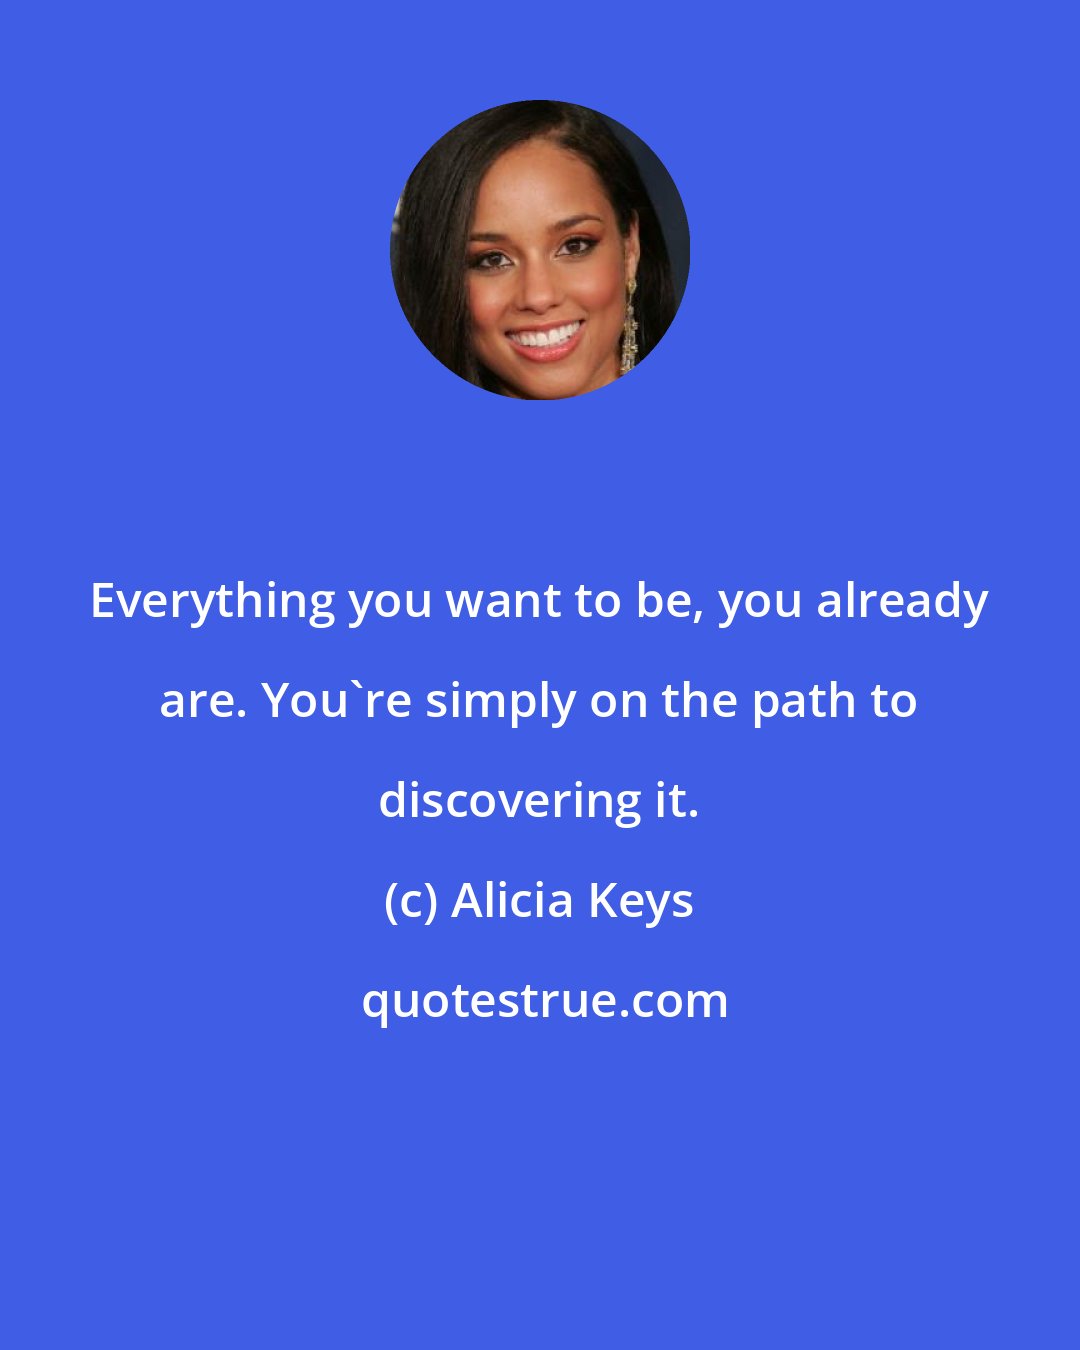 Alicia Keys: Everything you want to be, you already are. You're simply on the path to discovering it.